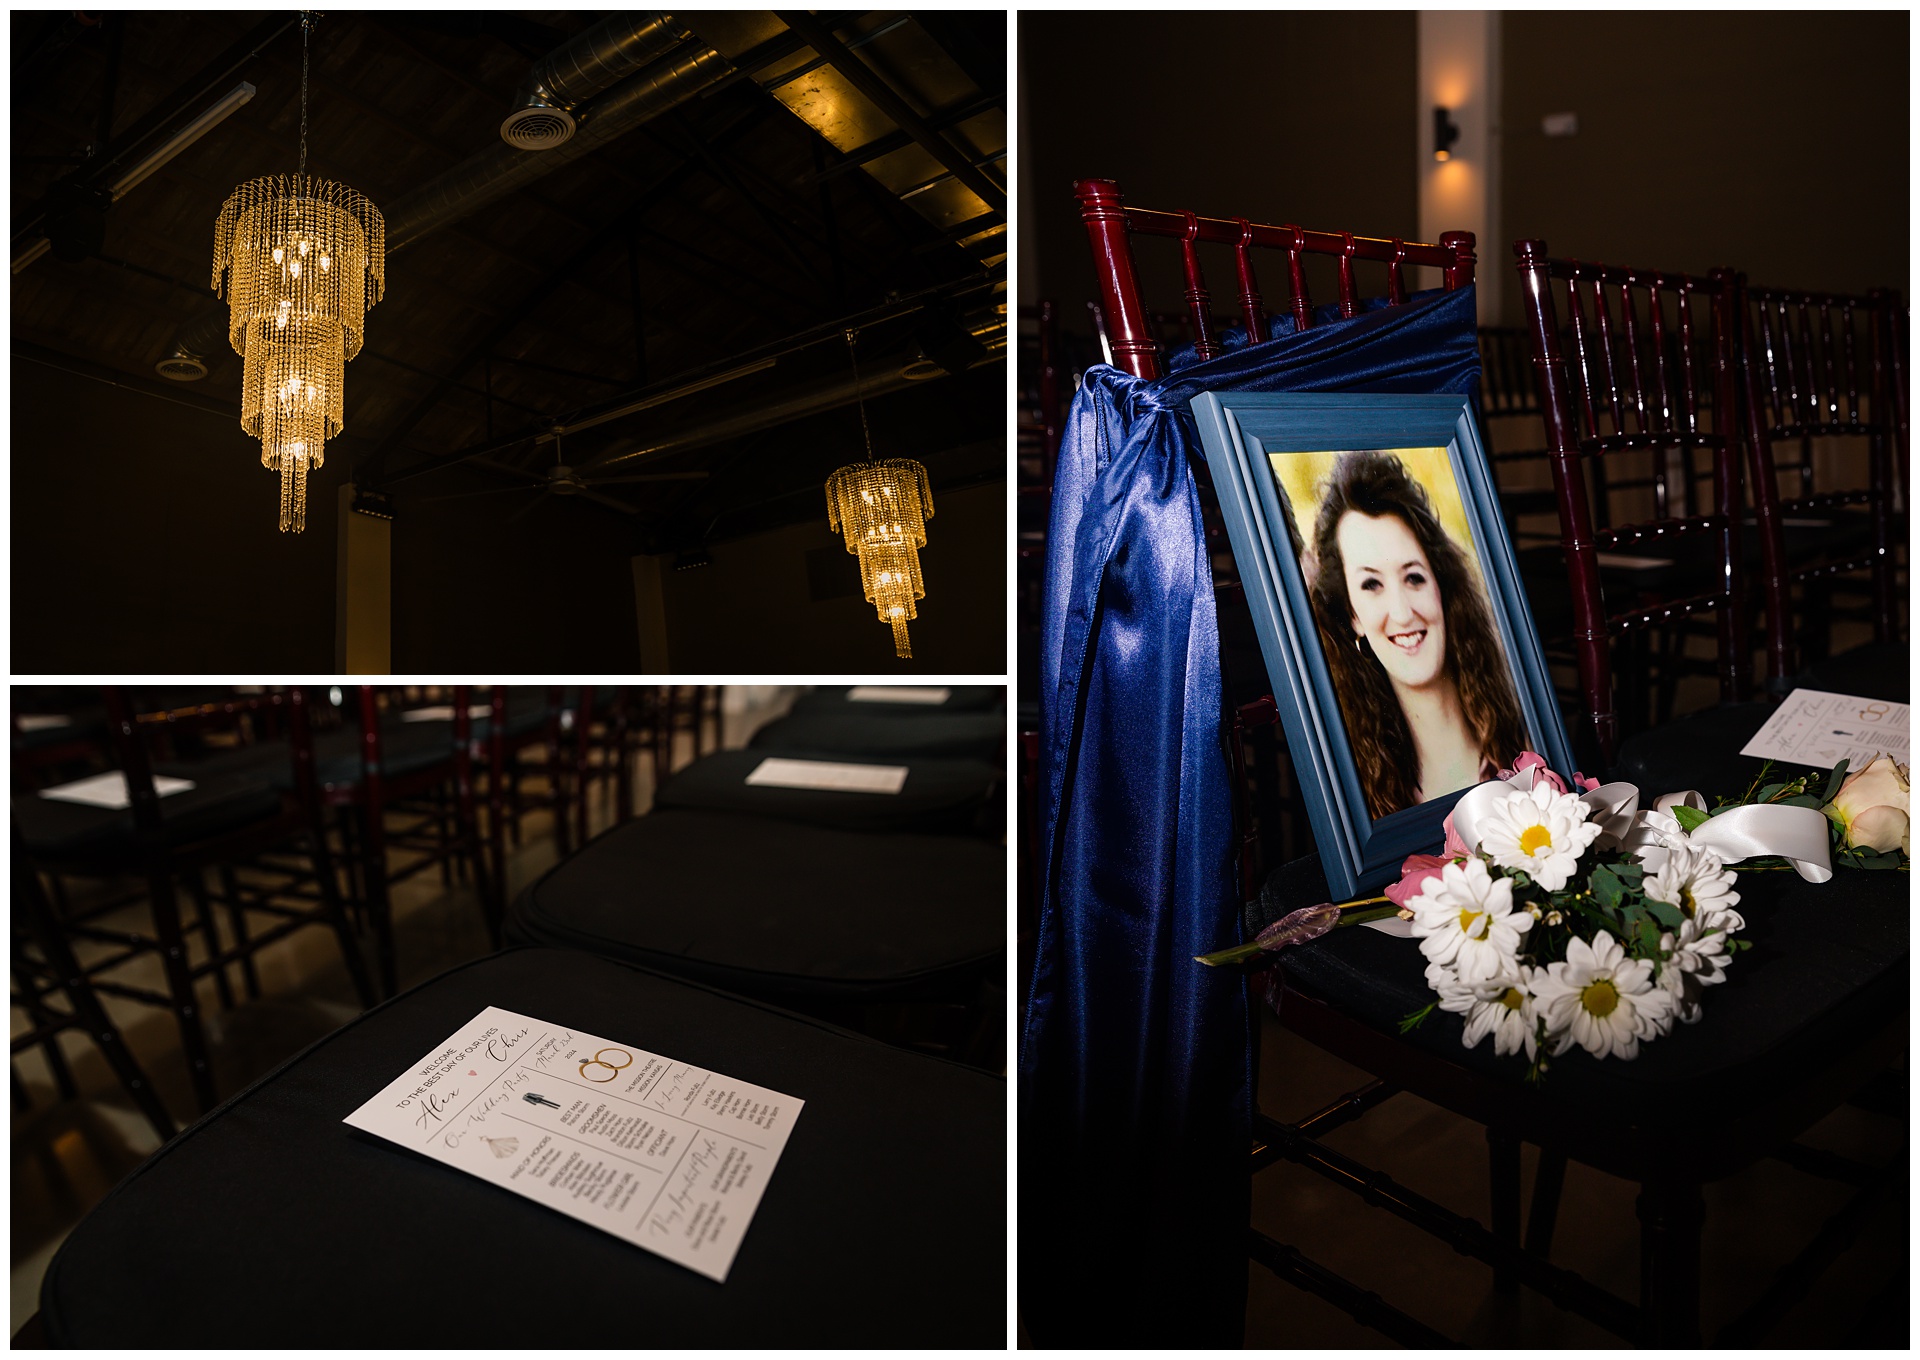 Wedding photography at The Mission Theatre in Mission, Kansas, by Kansas City wedding photographers Wisdom-Watson Weddings.